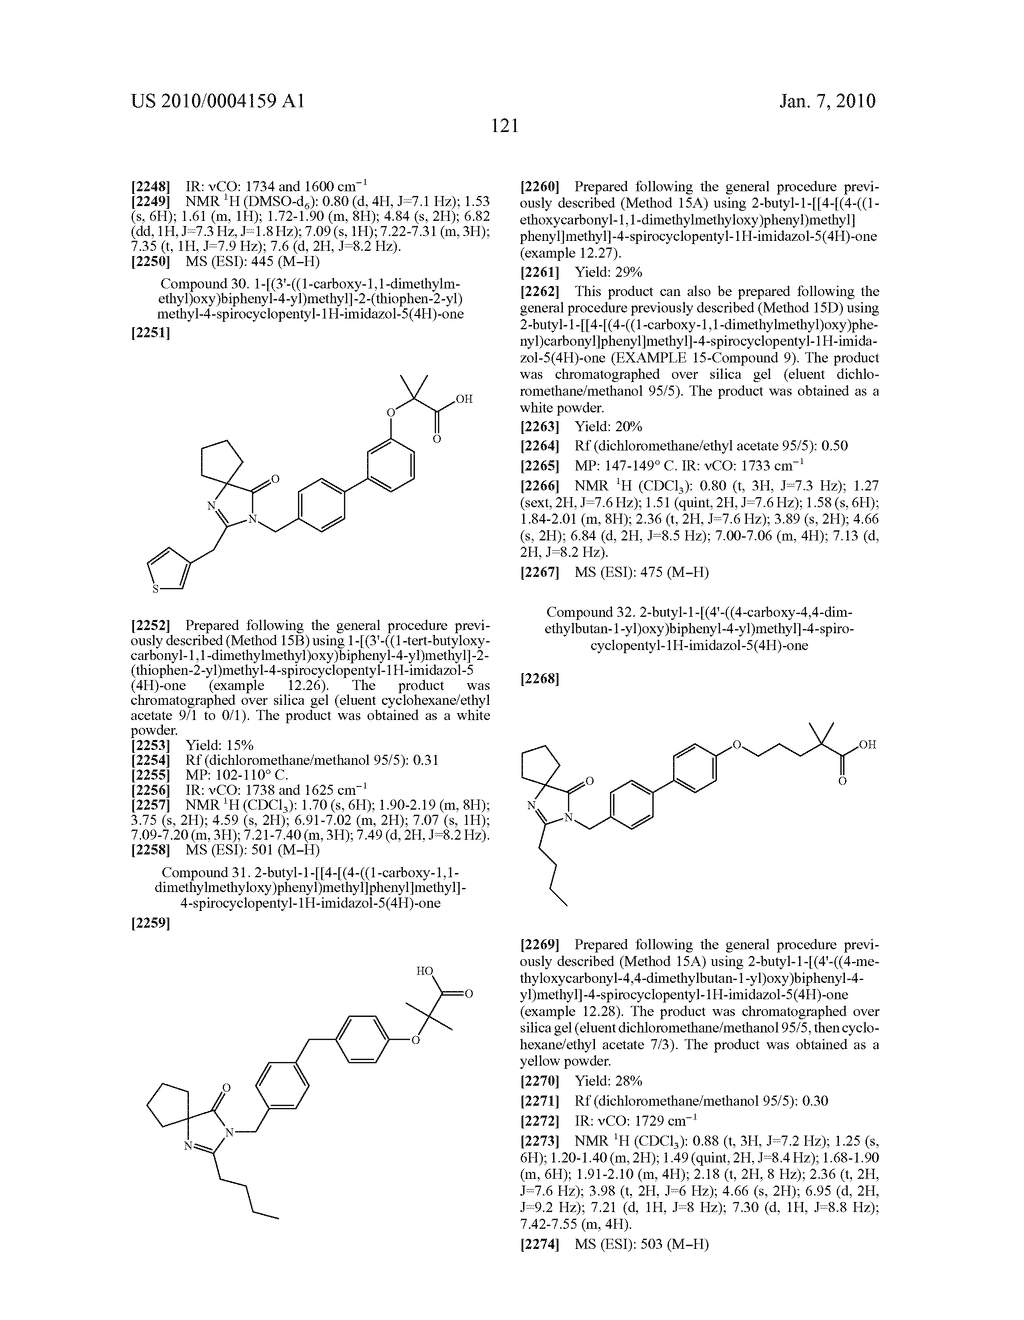 SUBSTITUTED IMIDAZOLONE DERIVATIVES, PREPARATIONS AND USES - diagram, schematic, and image 149